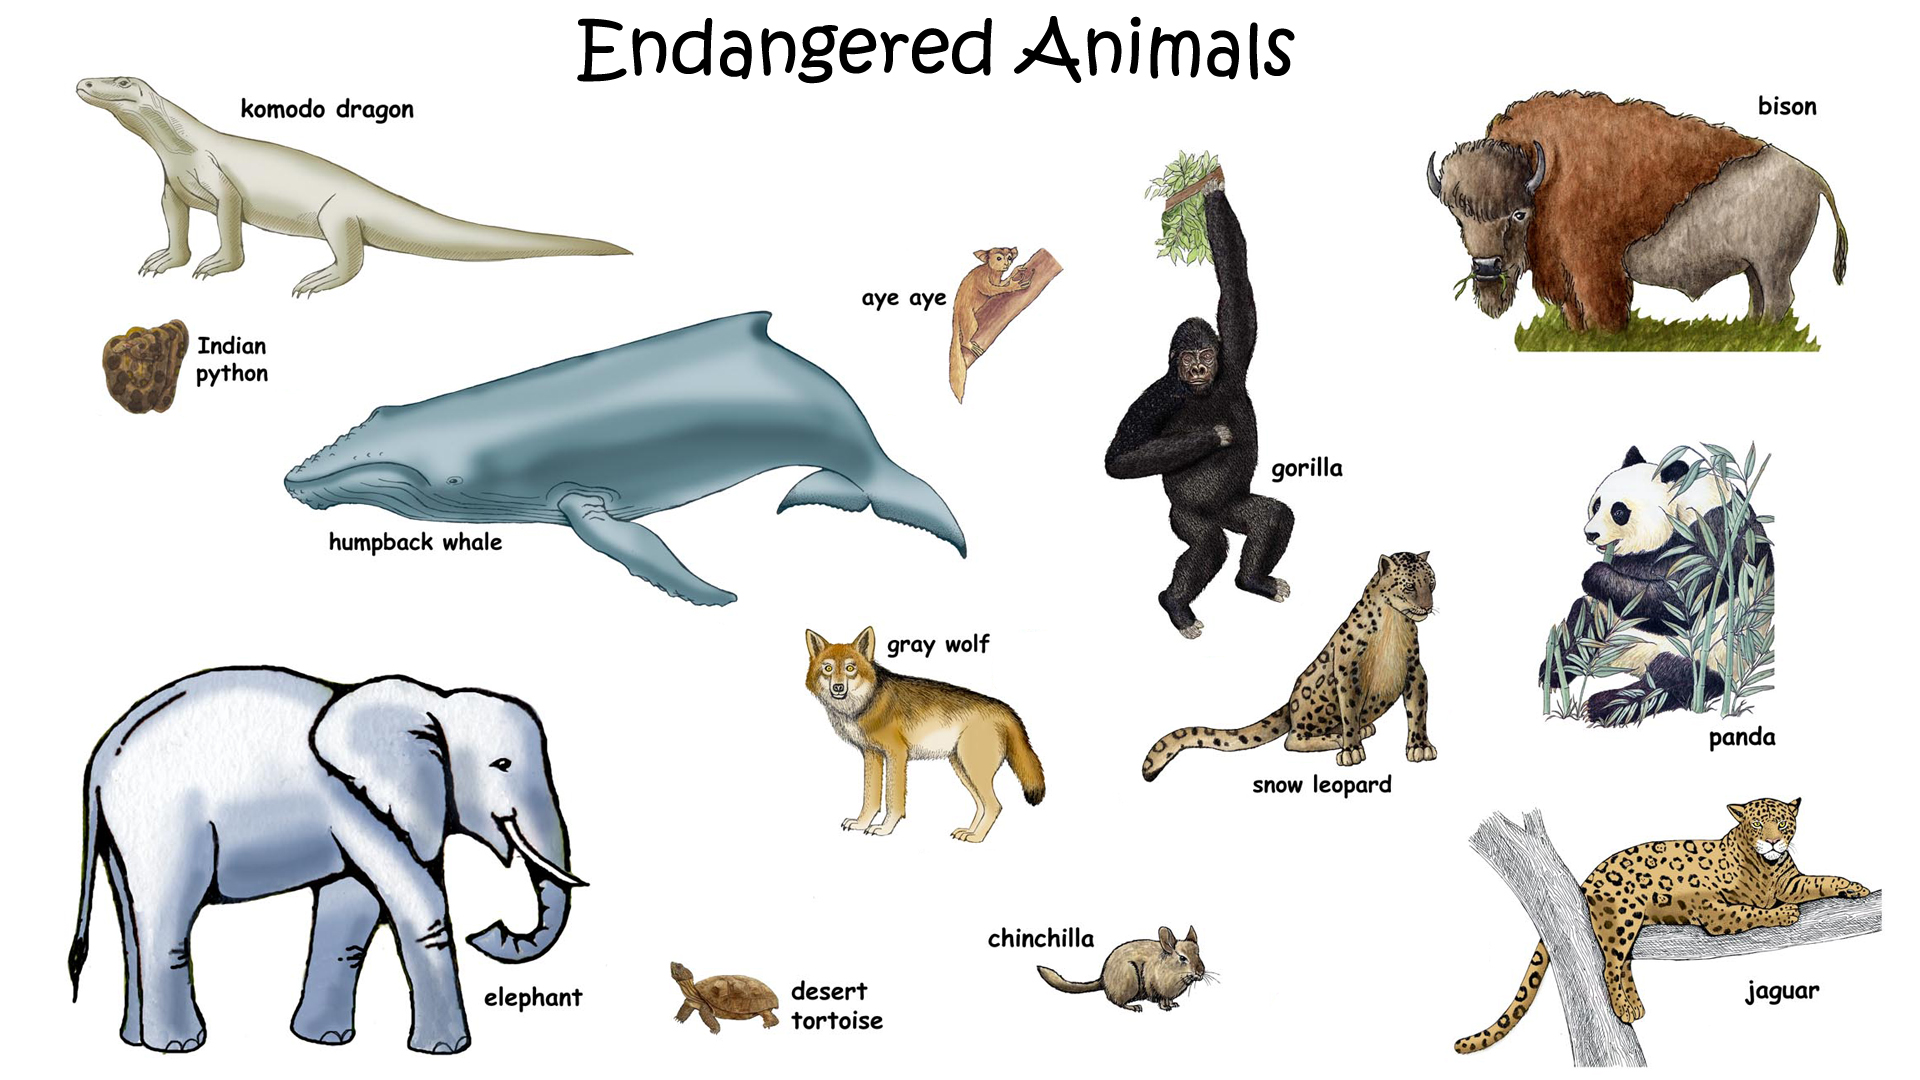 picture-of-endangered-animals-with-names-for-kids-hd-wallpapers-wallpapers-download-high